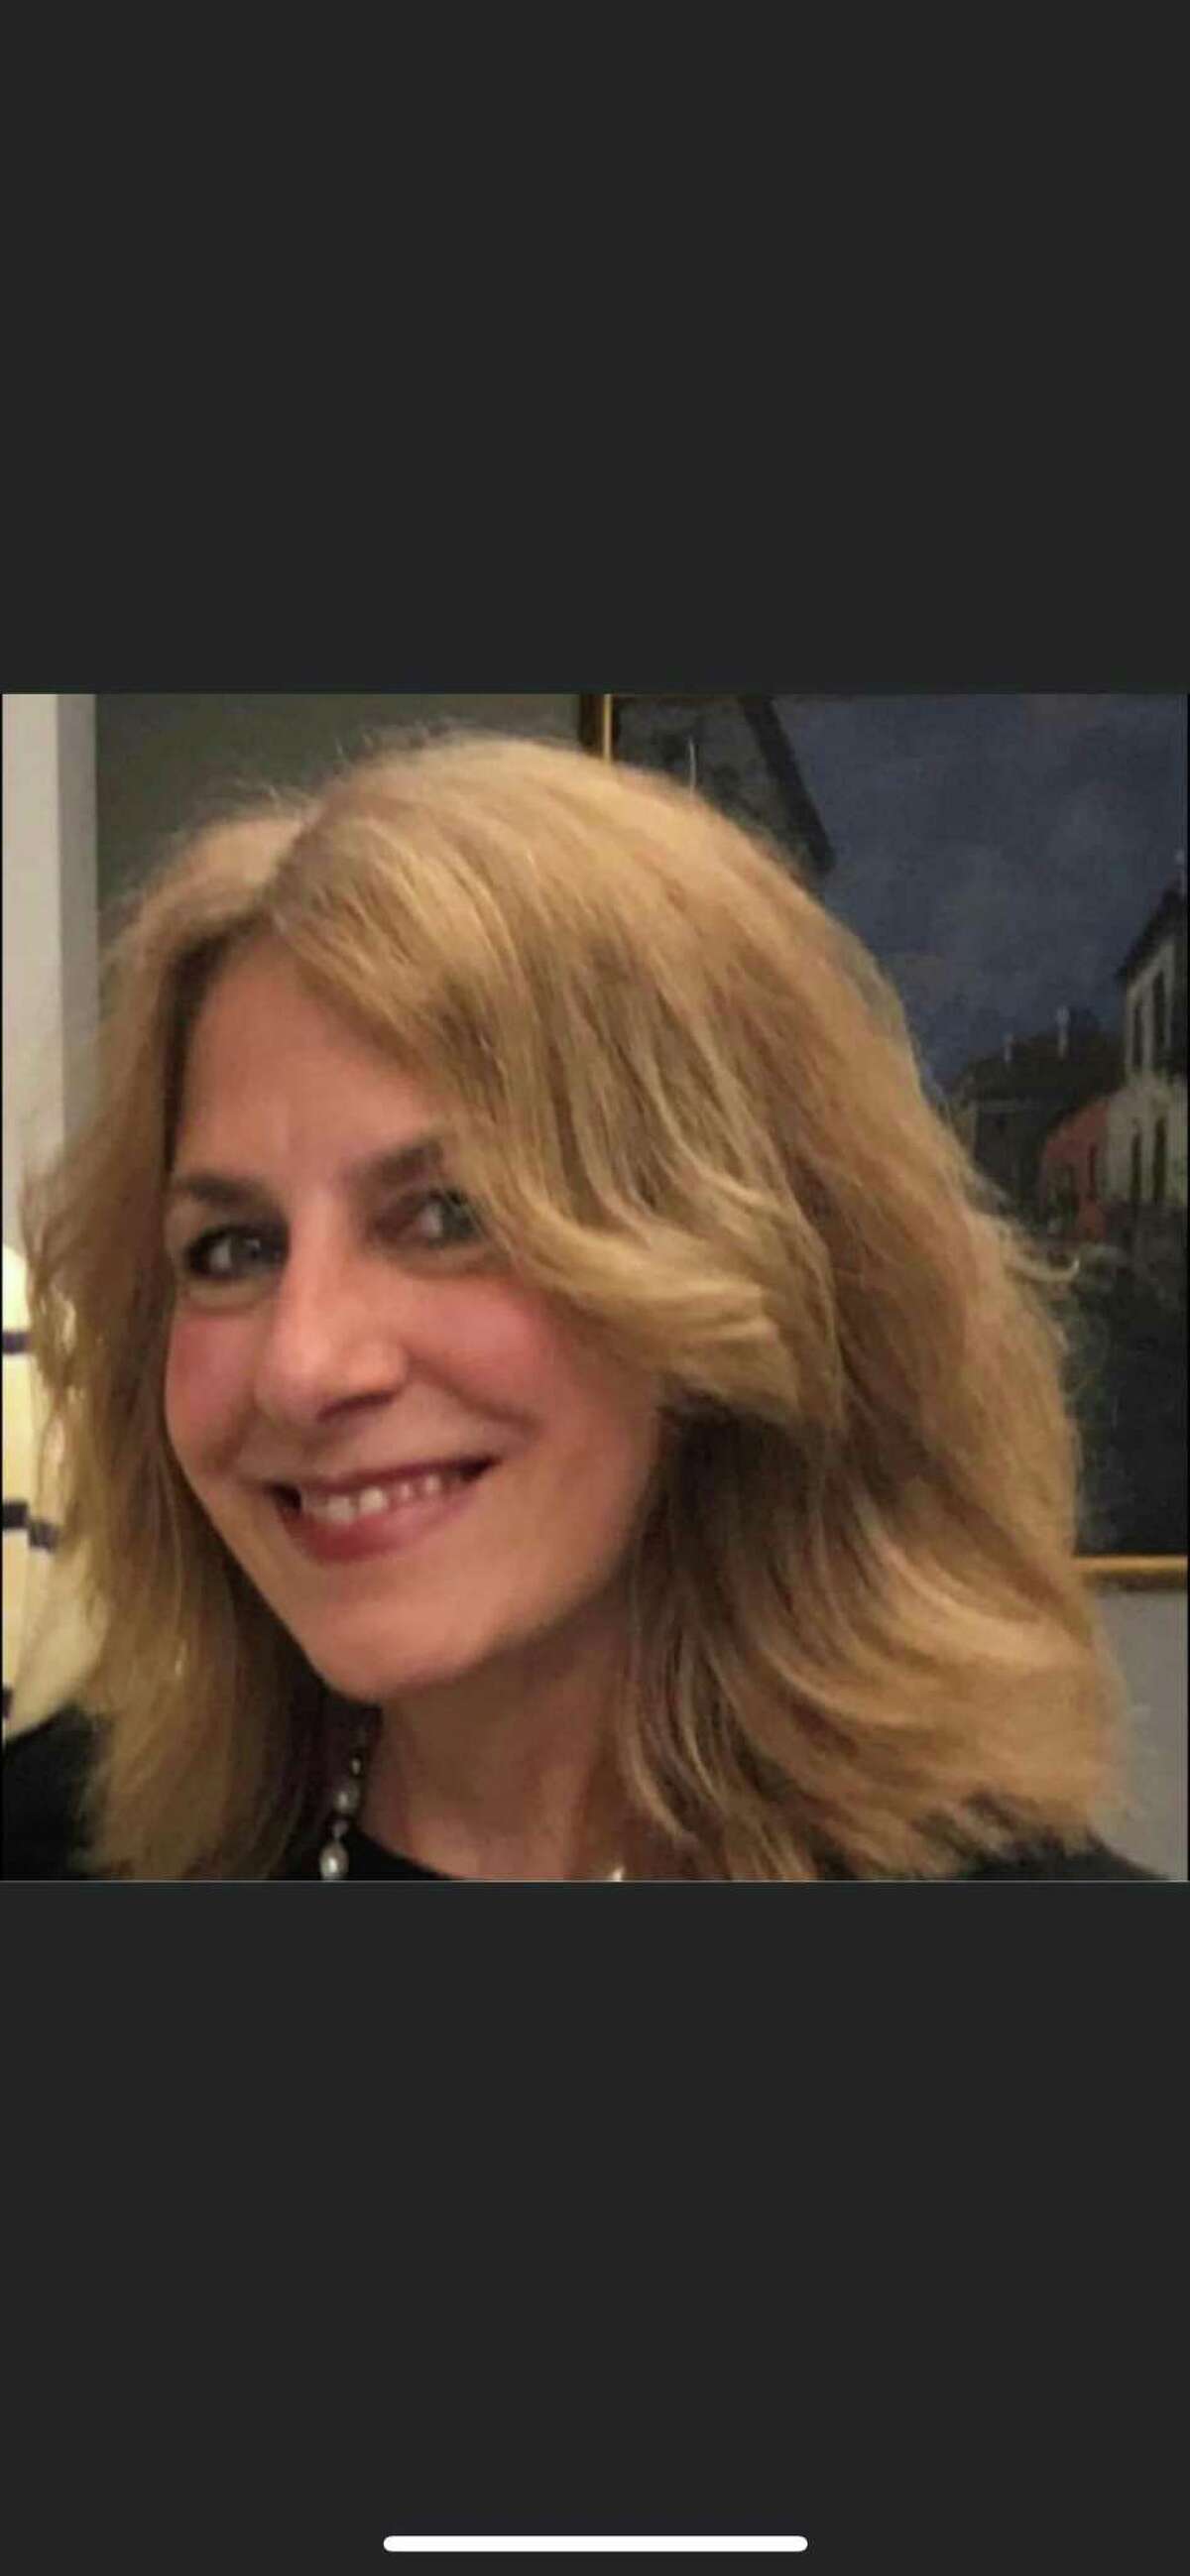 Community Health & Wellness Center recently announced that Cathryn Denault, Senior Professional in Human Resources Society for Human Resources Management-Senior Certified Professional, has been appointed as the Federally Qualified Health Center’s Human Resources Director.